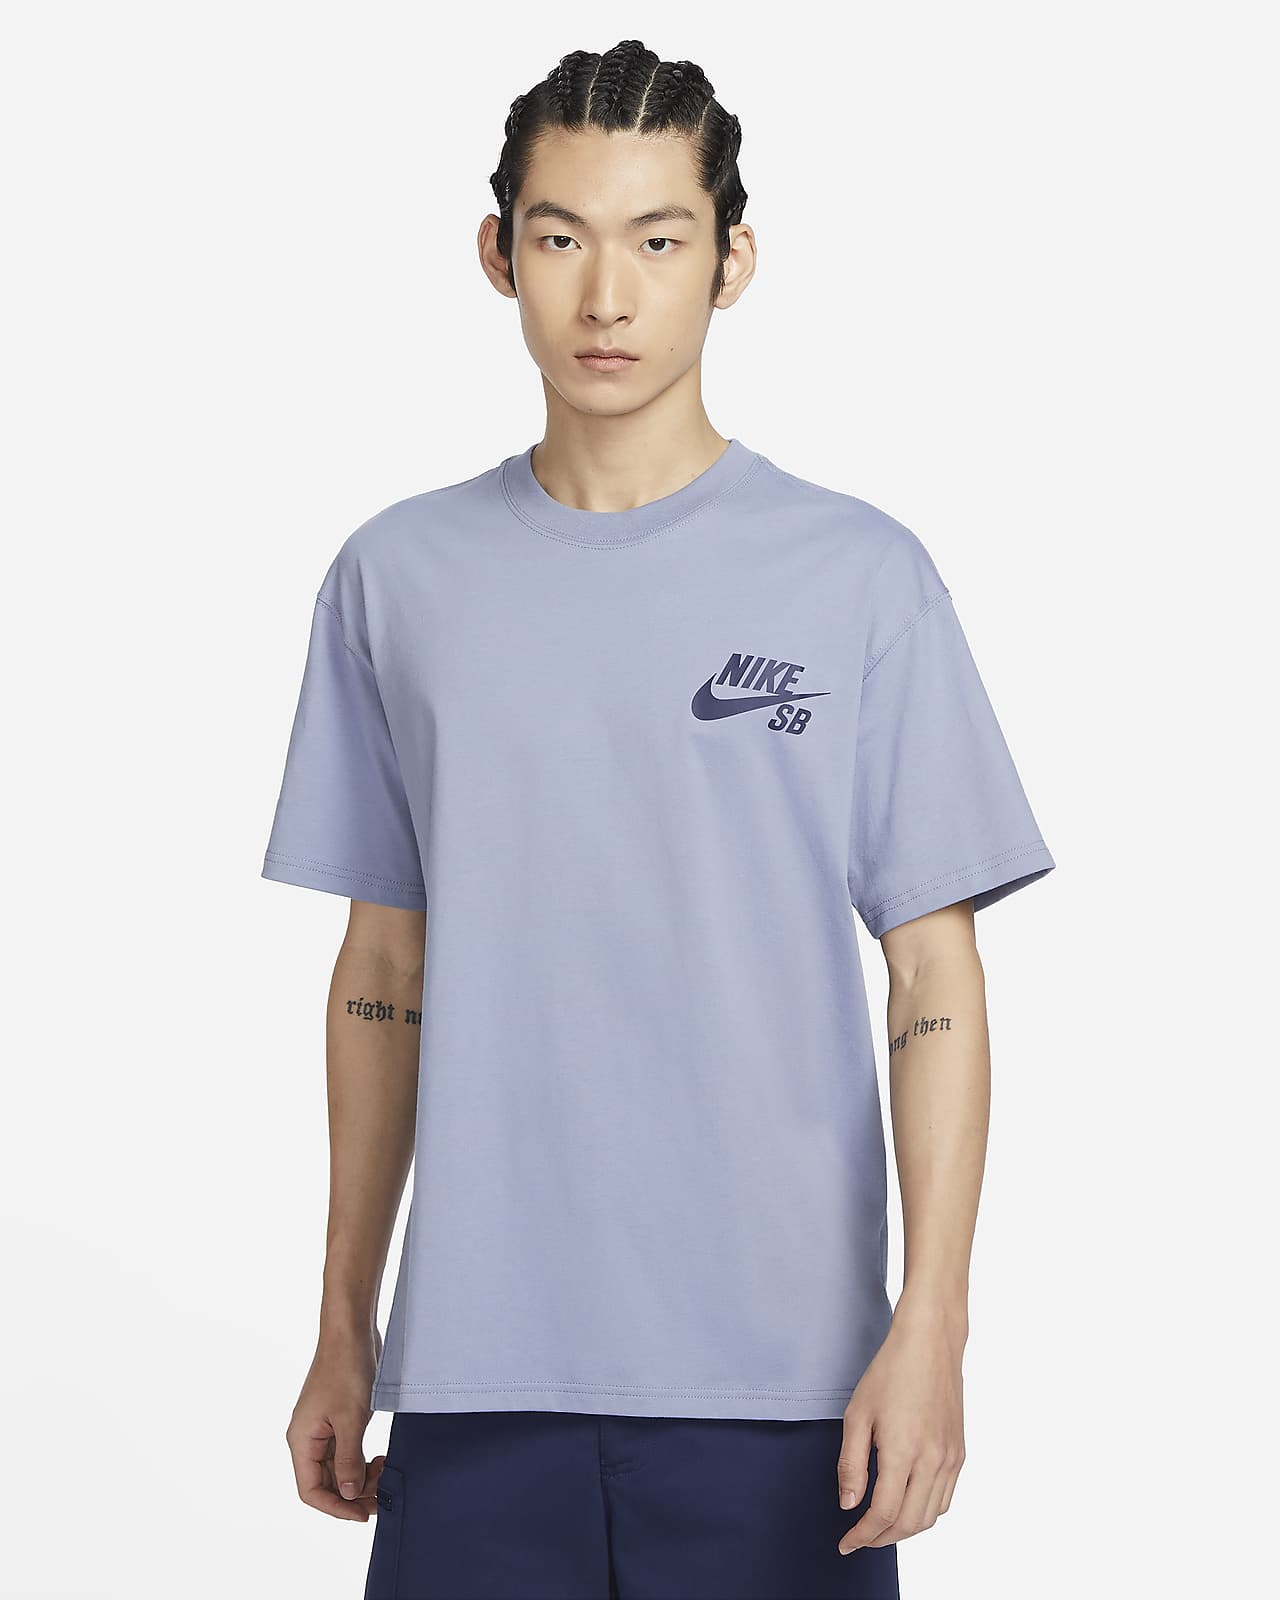 https://static.nike.com/a/images/t_PDP_1280_v1/f_auto,q_auto:eco/88f3fbb7-0936-4e23-a75a-19b70cfd3a2d/sb-logo-skate-t-shirt-LBBxZV.png